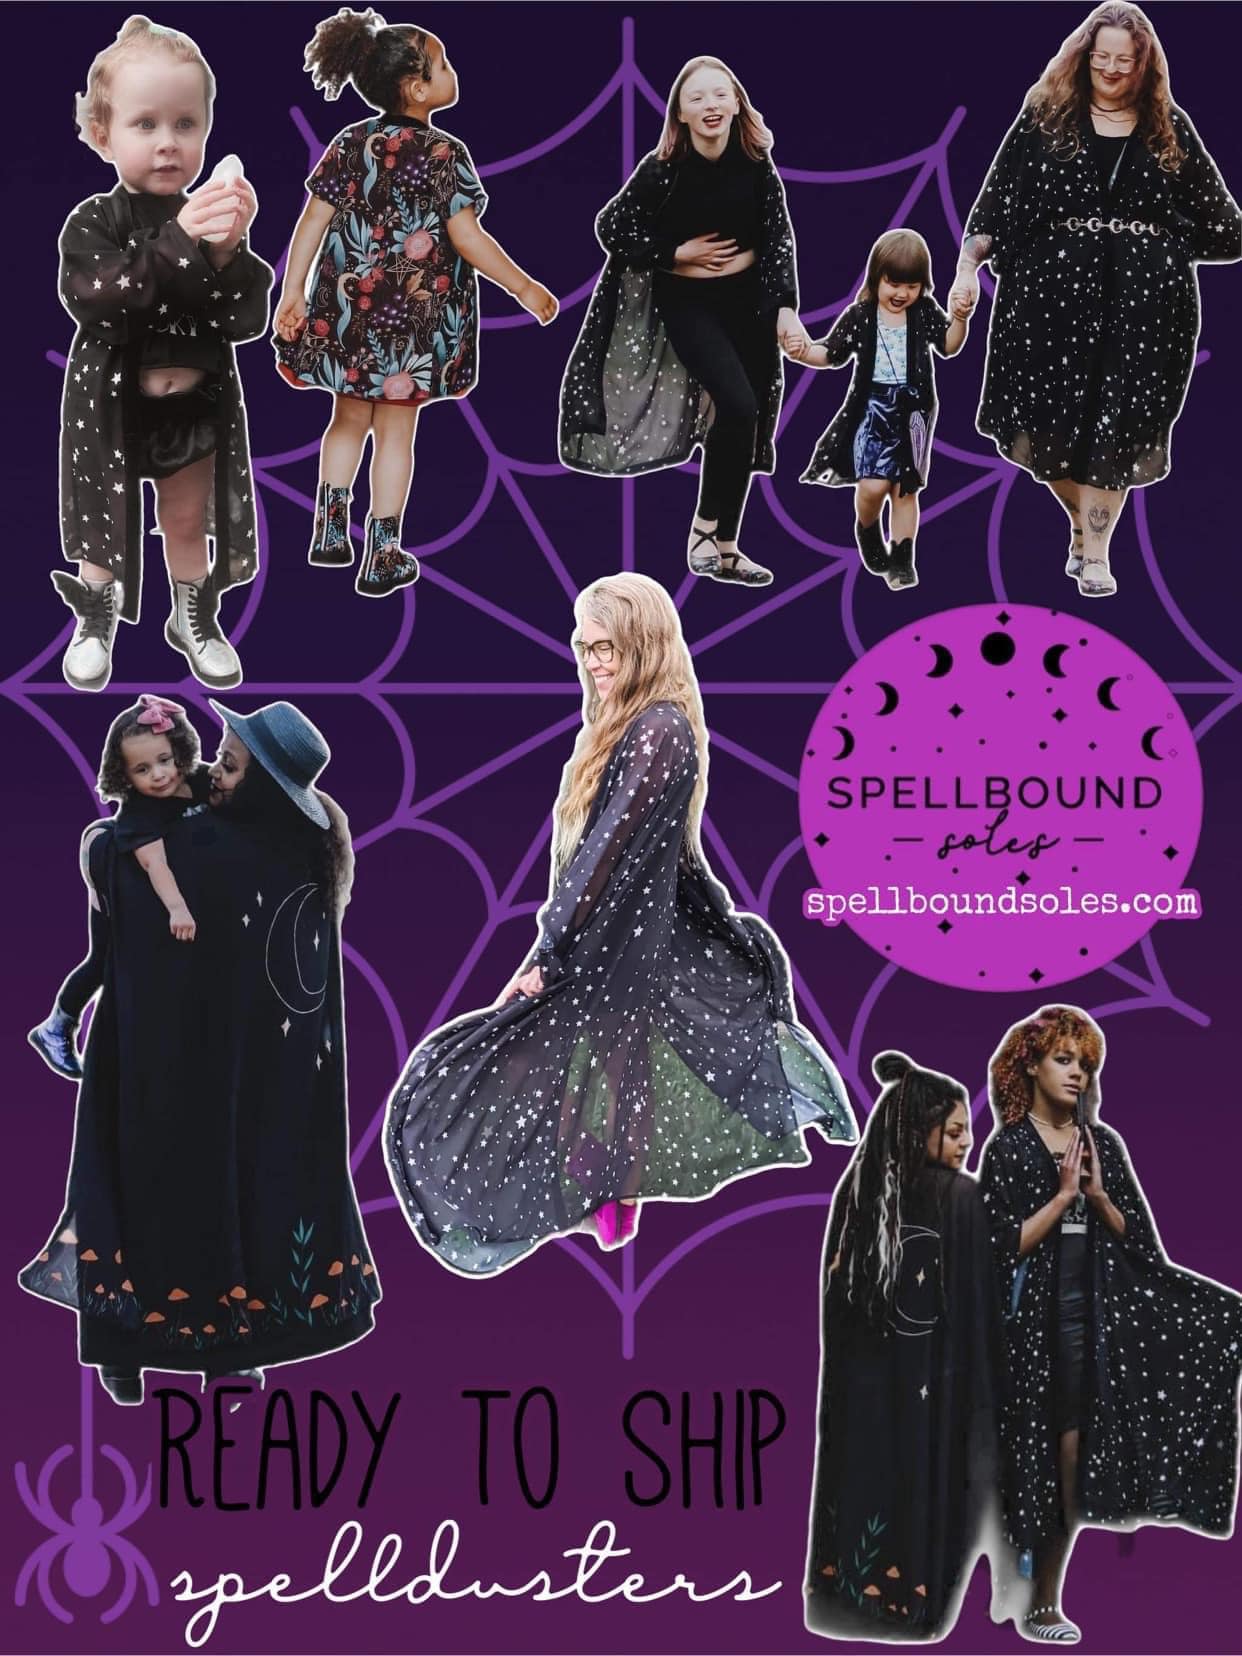 READY TO SHIP-- Wednesday Spooky Girl inspired large scale Spellduster